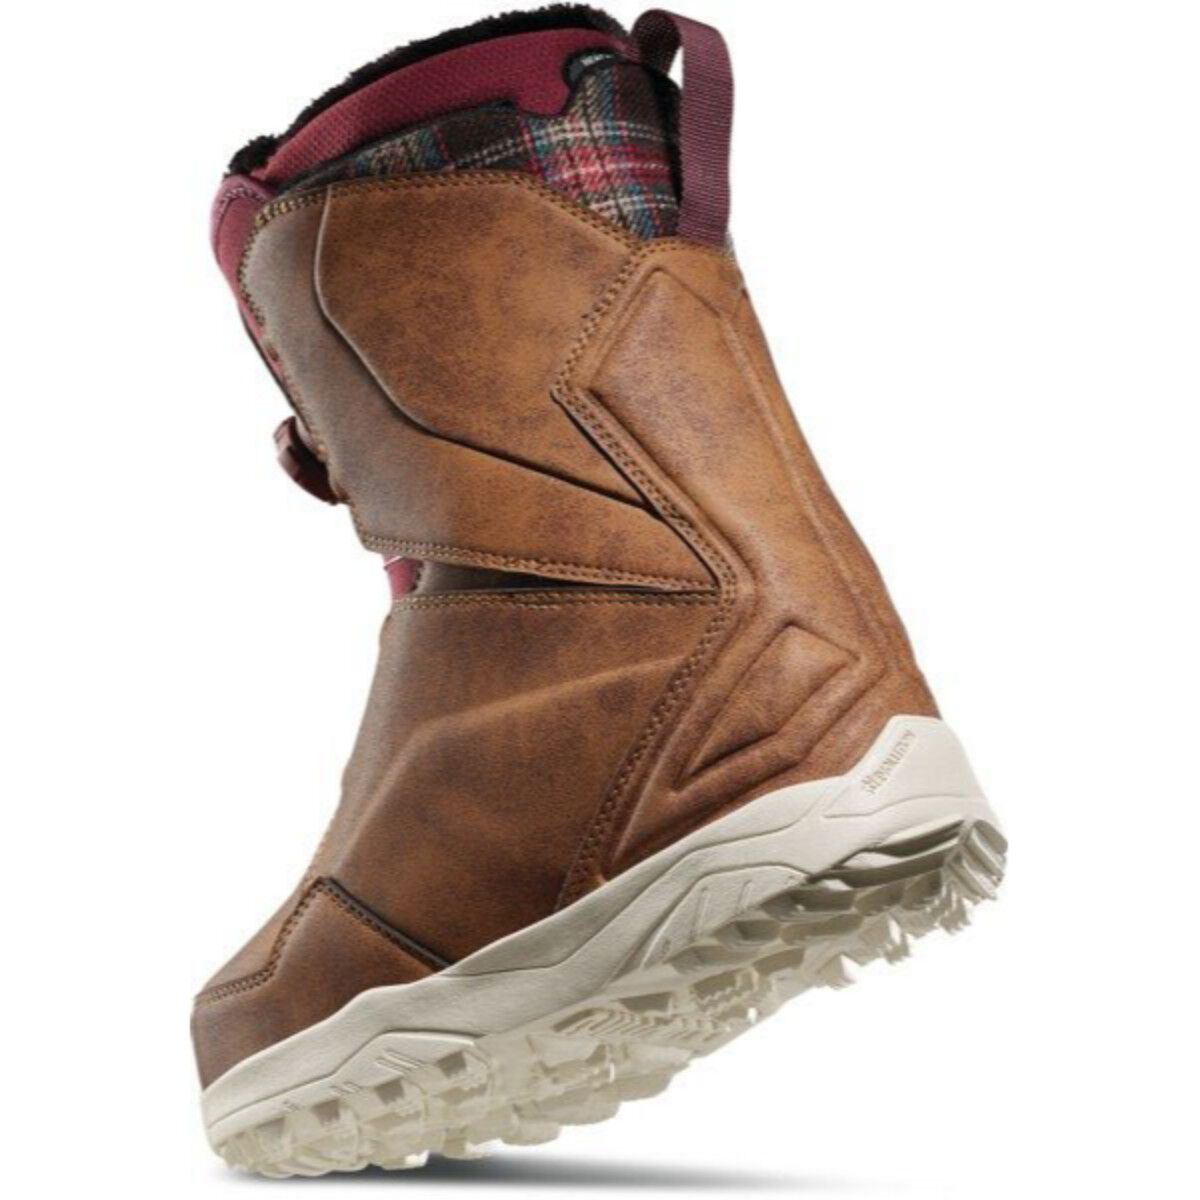 thirtytwo Women's Lashed Double Boa '19/20 Snowboard Boot 